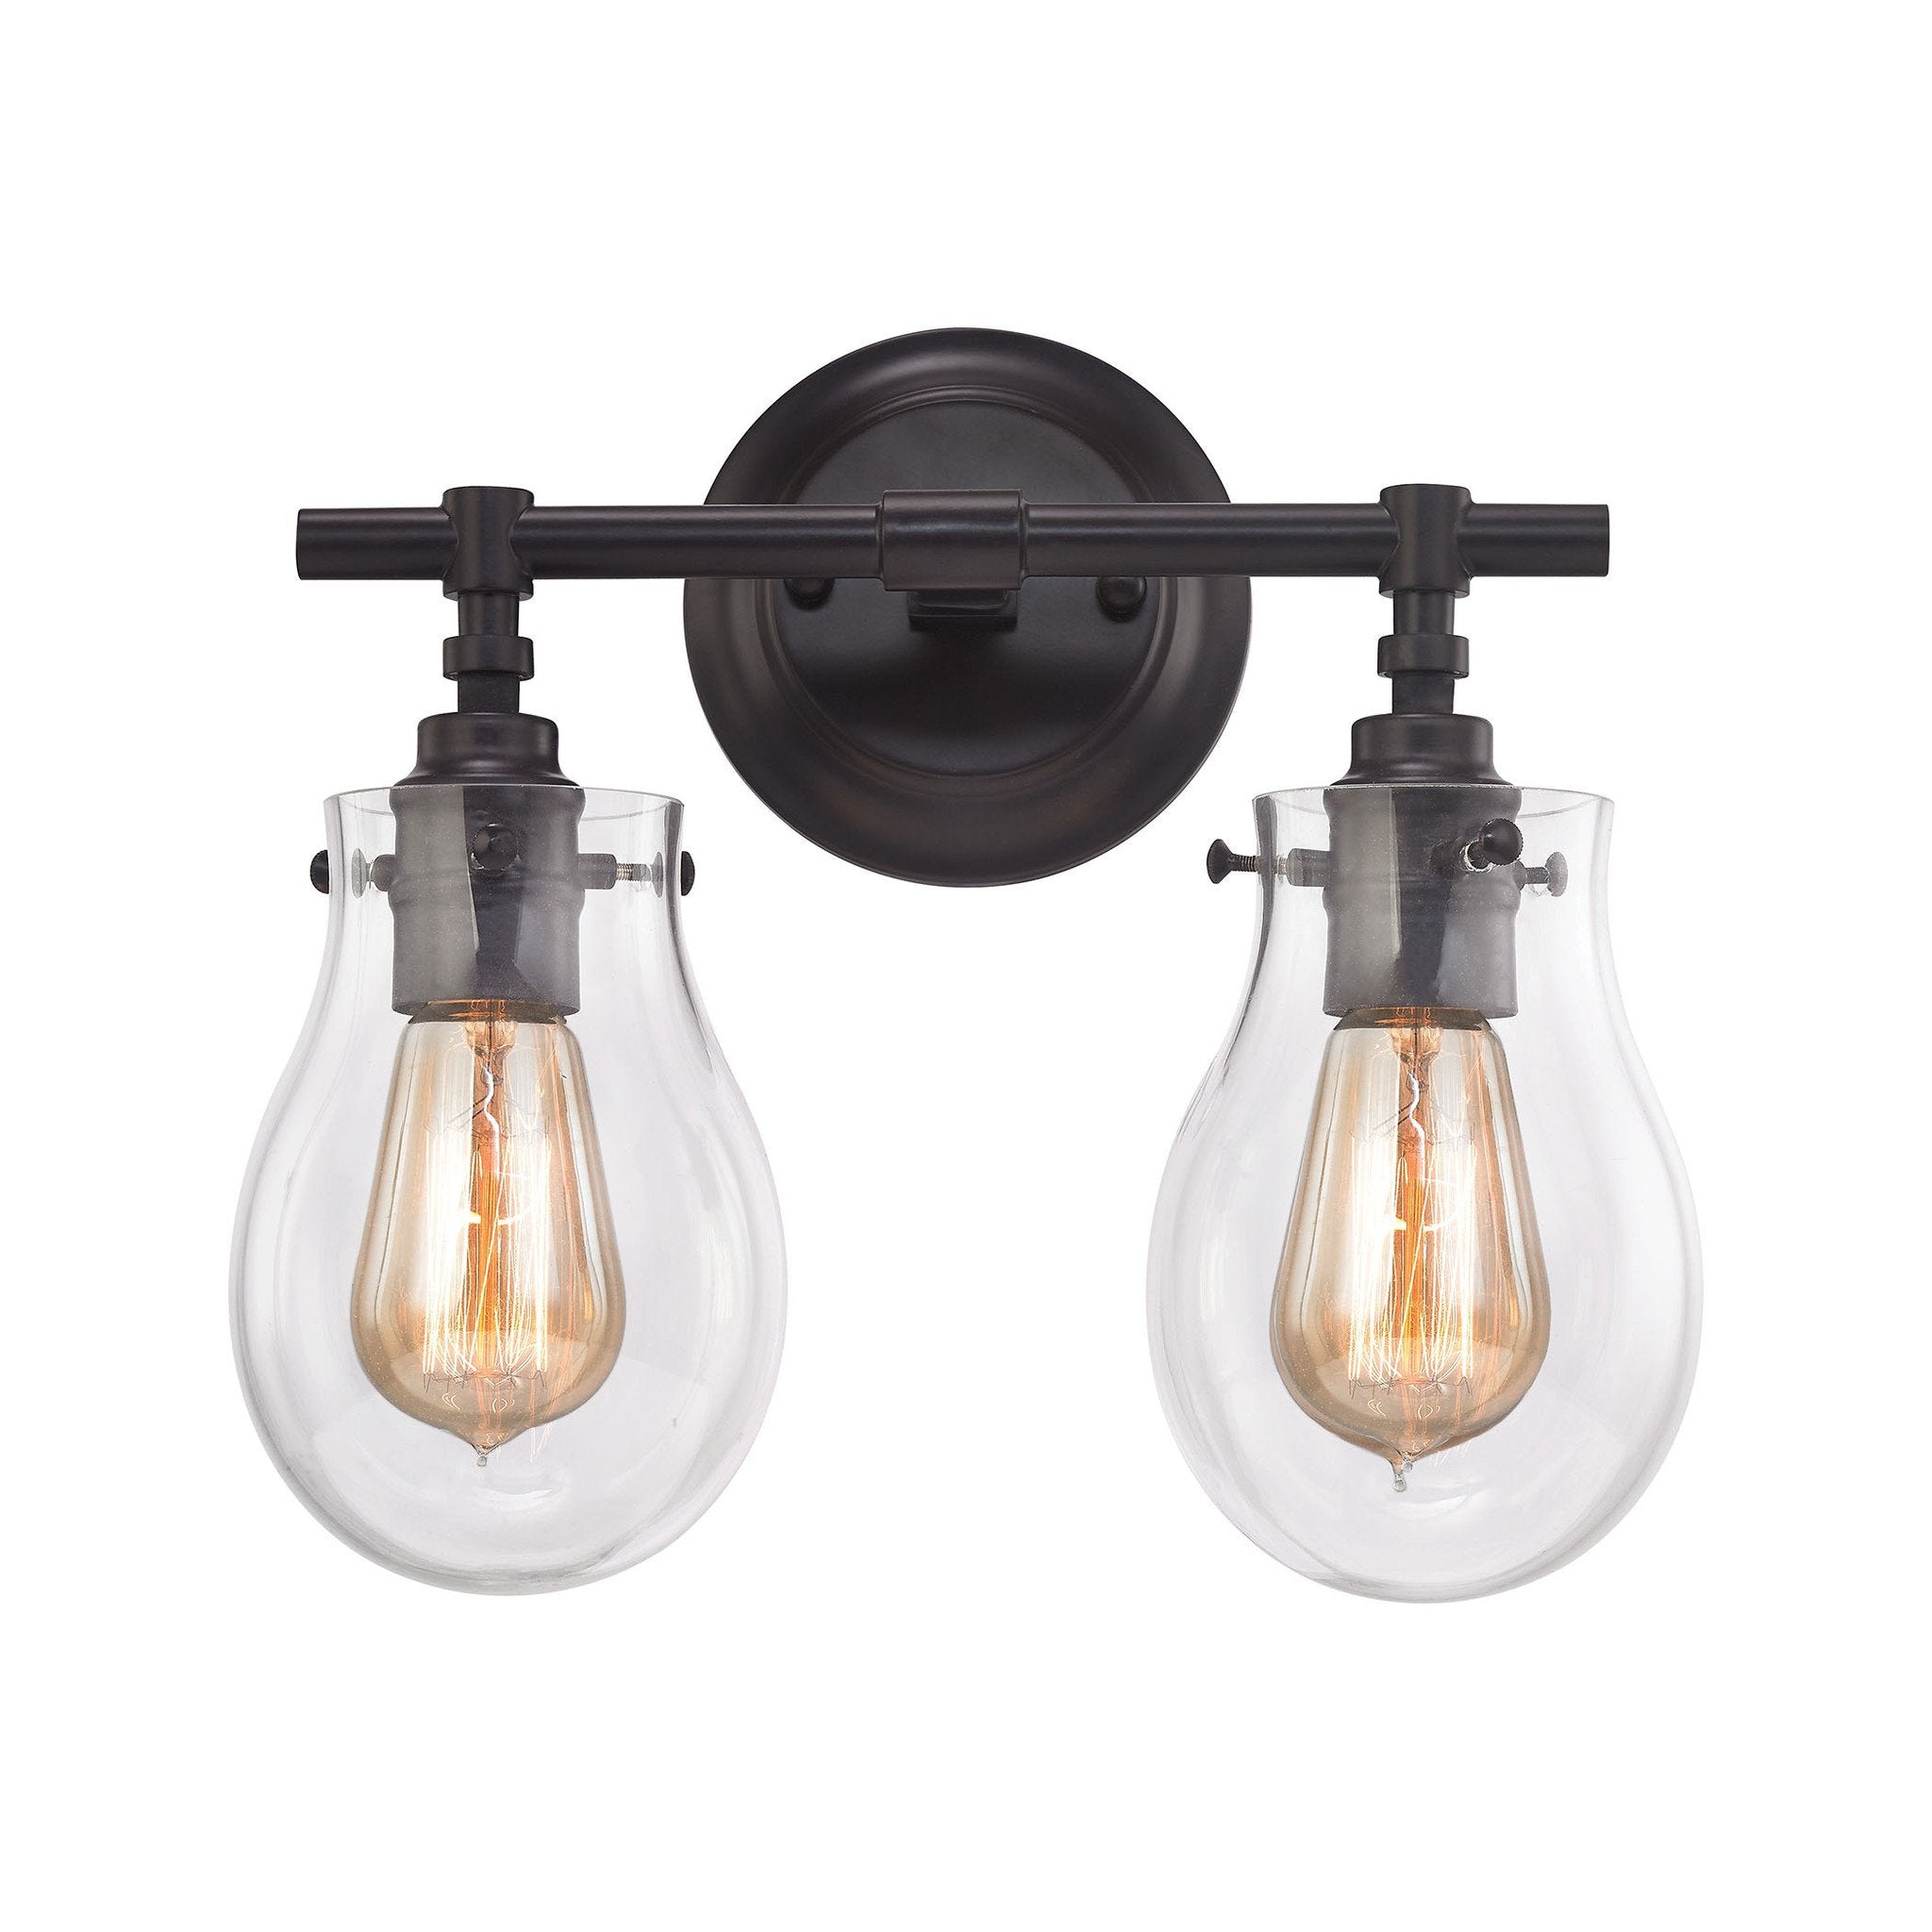 2 Light Jaelyn Vanity Light in Oil Rubbed Bronze with clear teardrop glass shades by Elk Lighting 31930/2